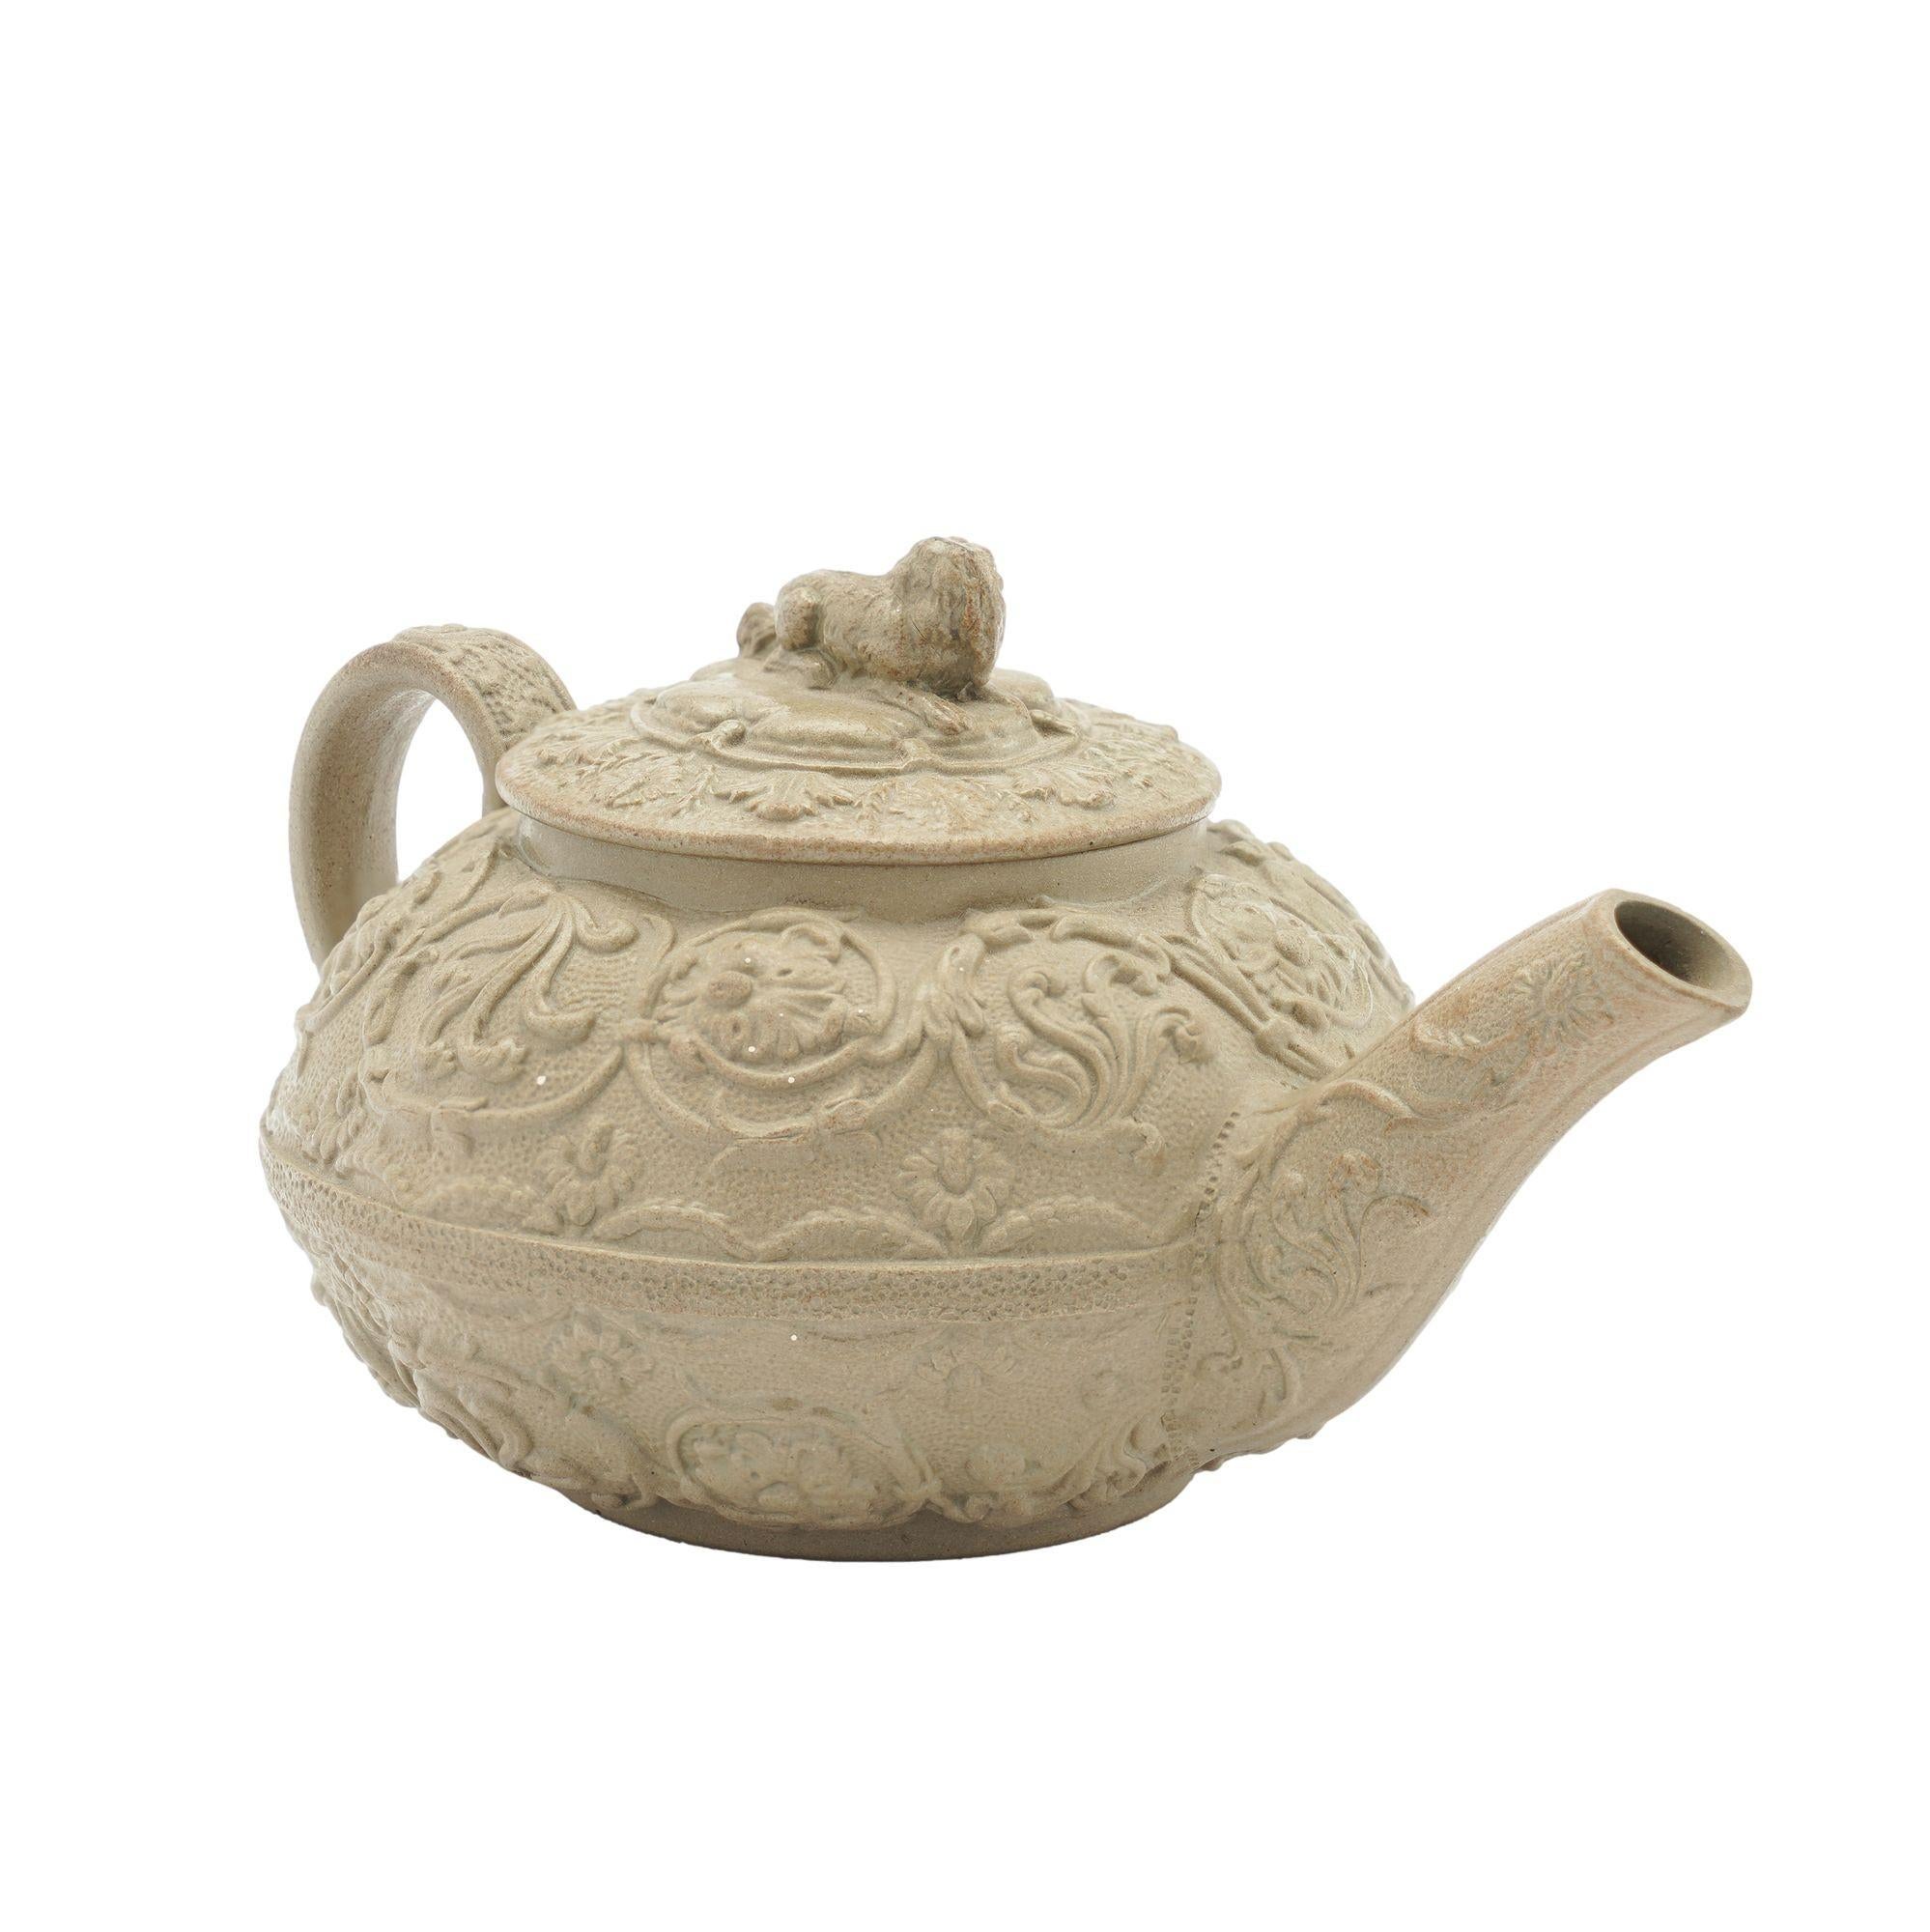 Ceramic Stoneware tea pot with spaniel lid finial by Wedgwood, c. 1829 For Sale